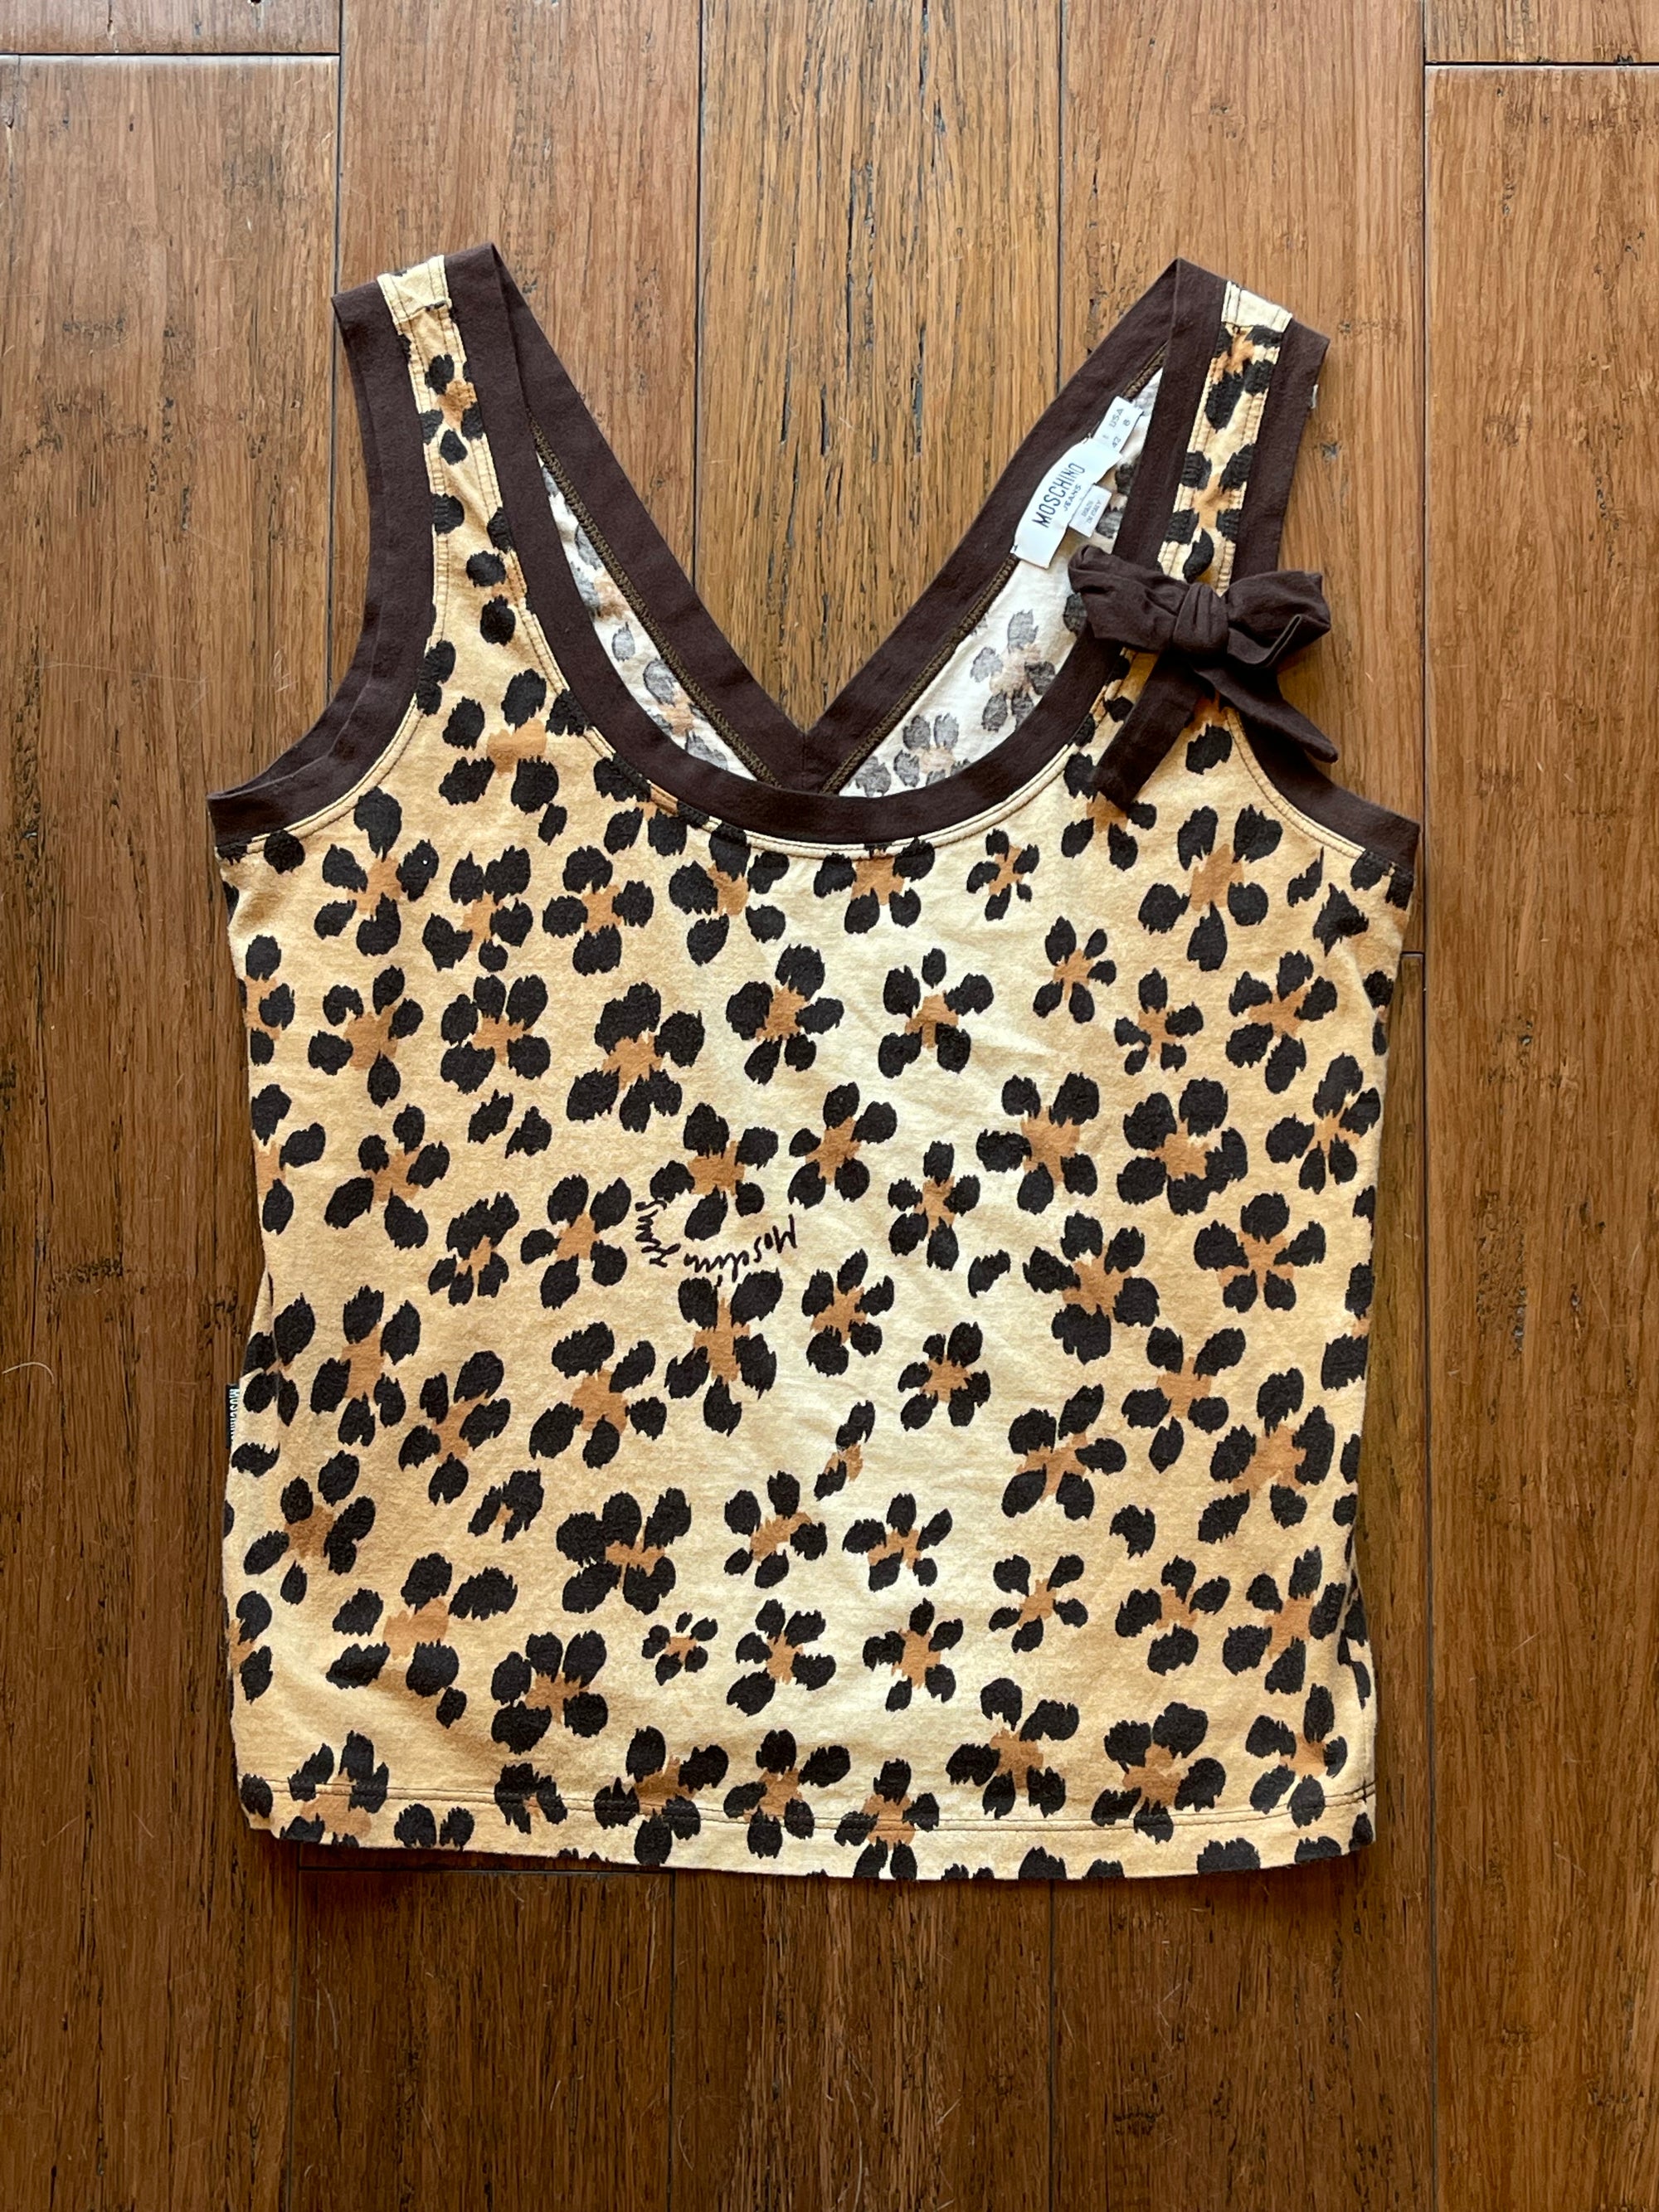 MOSCHINO Leopard Tank Top Size 8